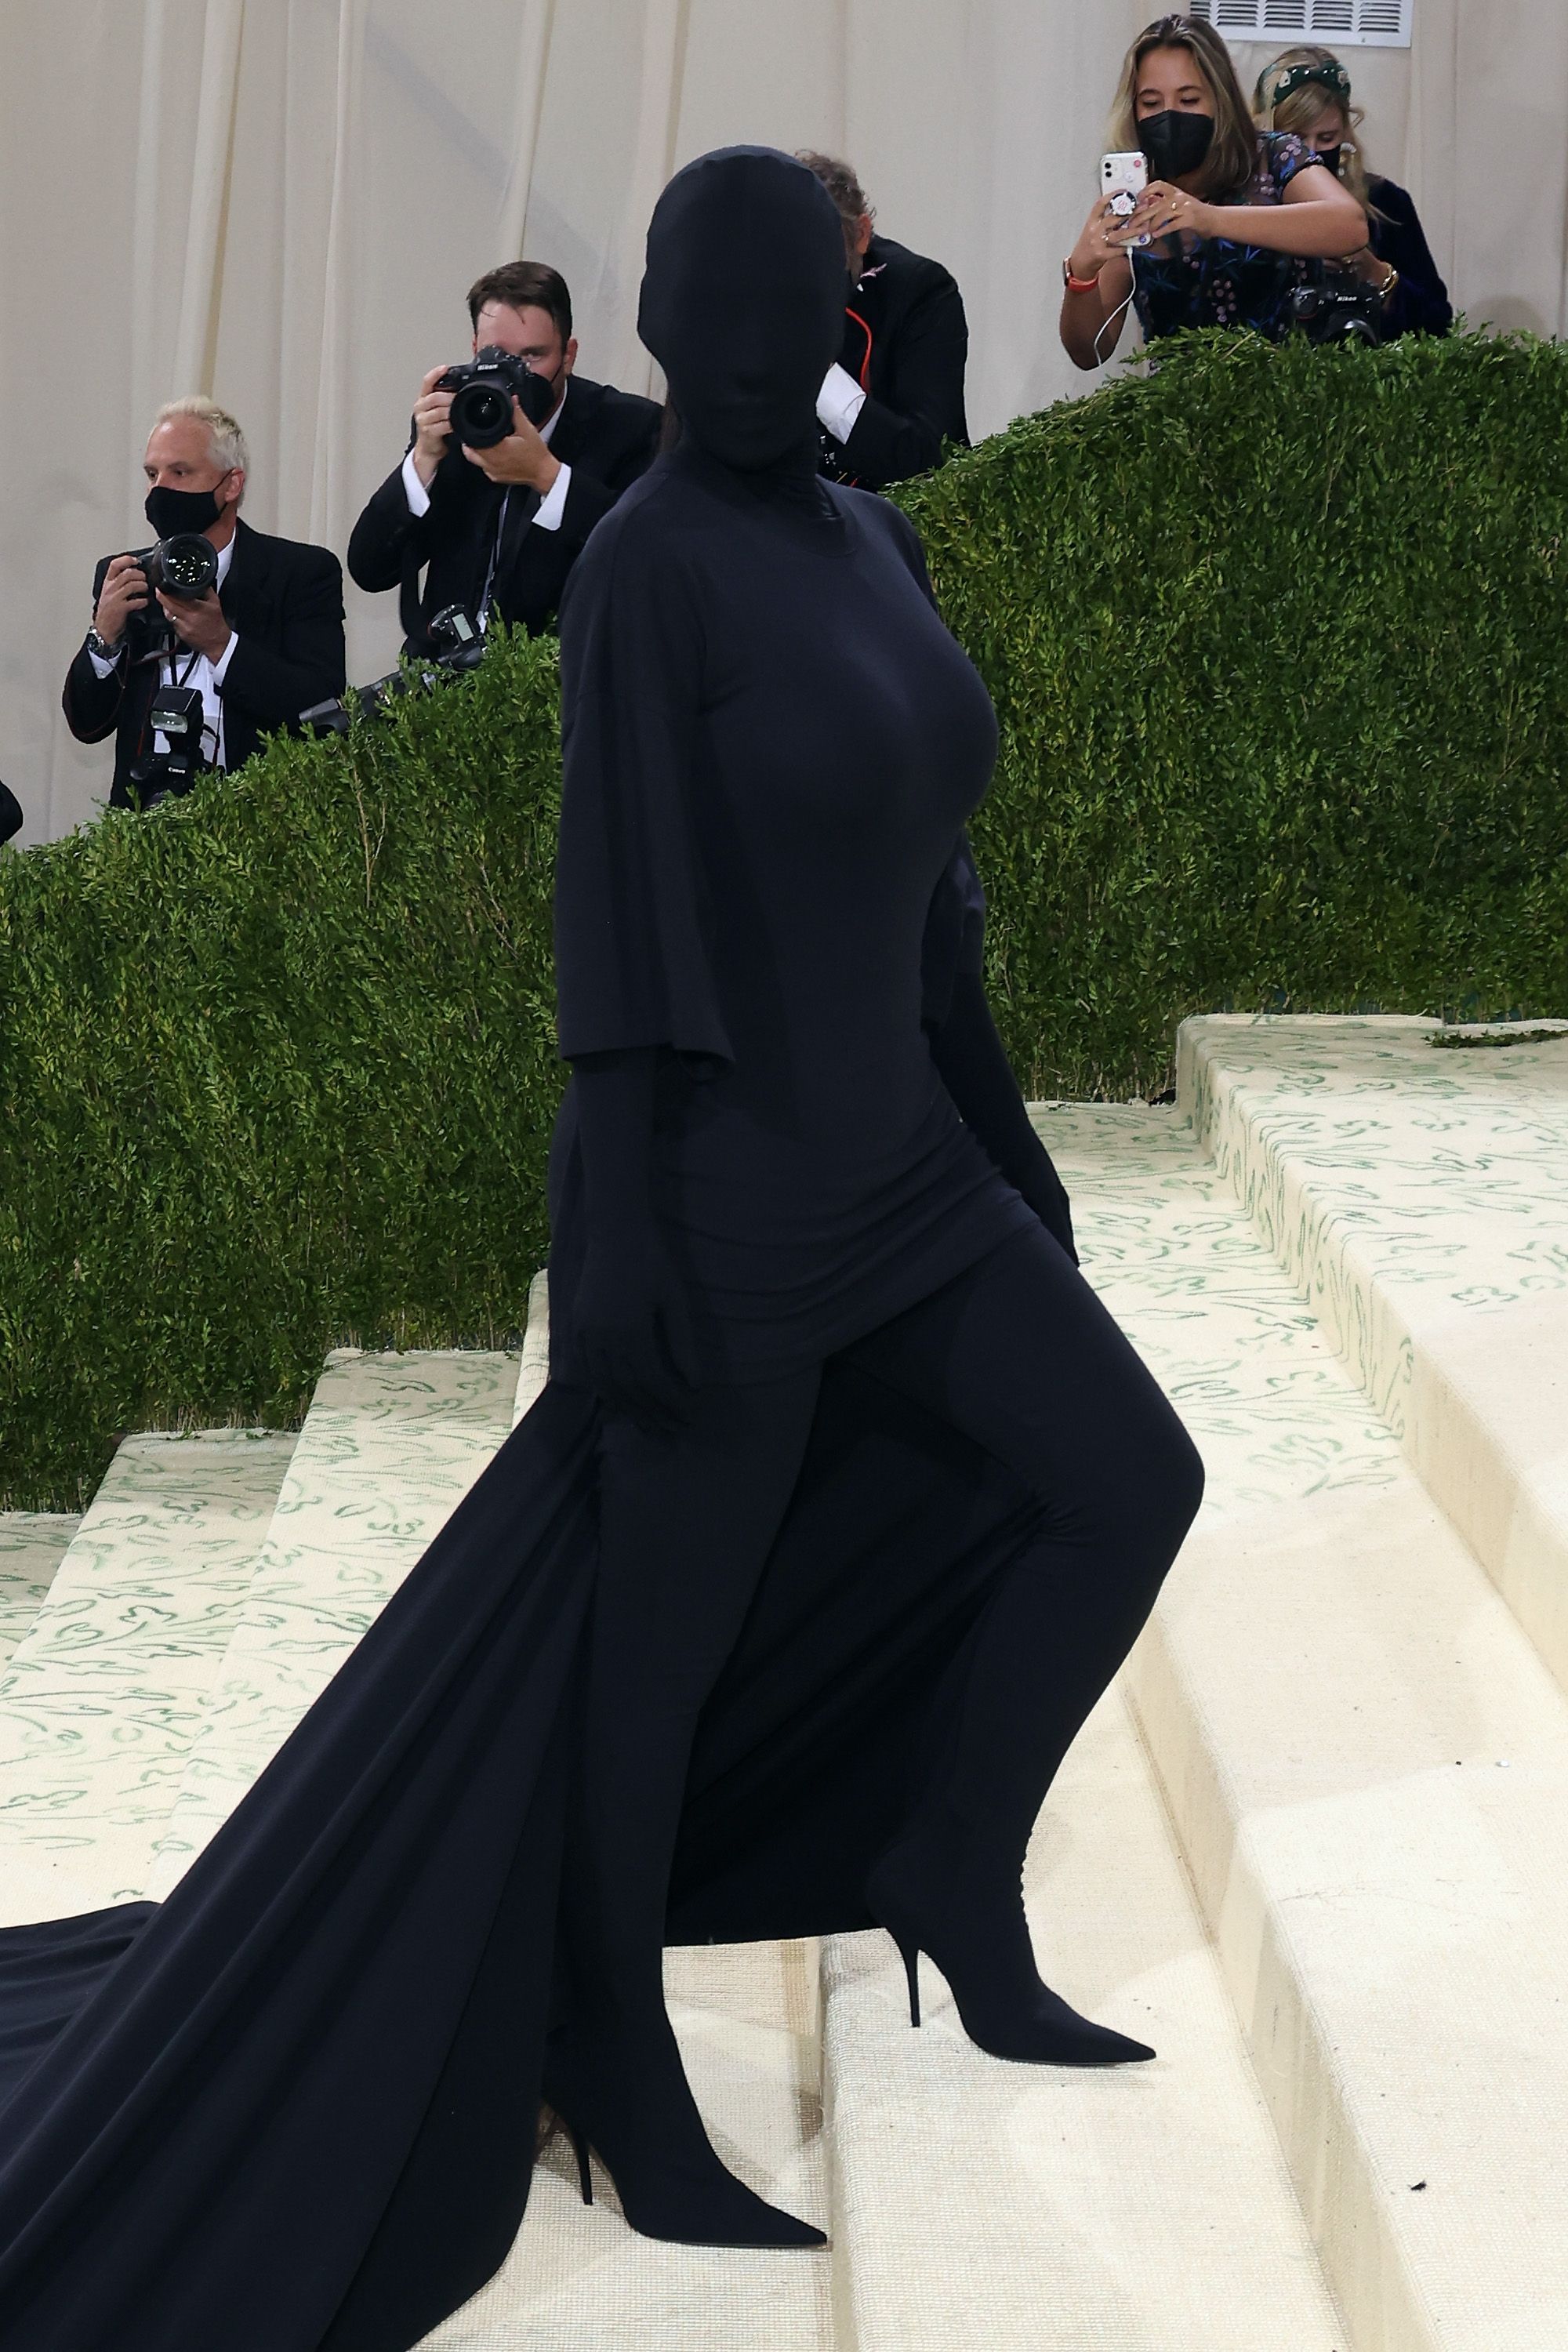 Kim Kardashian West during the 2021 Met Gala benefit "In America: A Lexicon of Fashion" at Metropolitan Museum of Art on September 13, 2021 in New York City. | Source: Getty Images